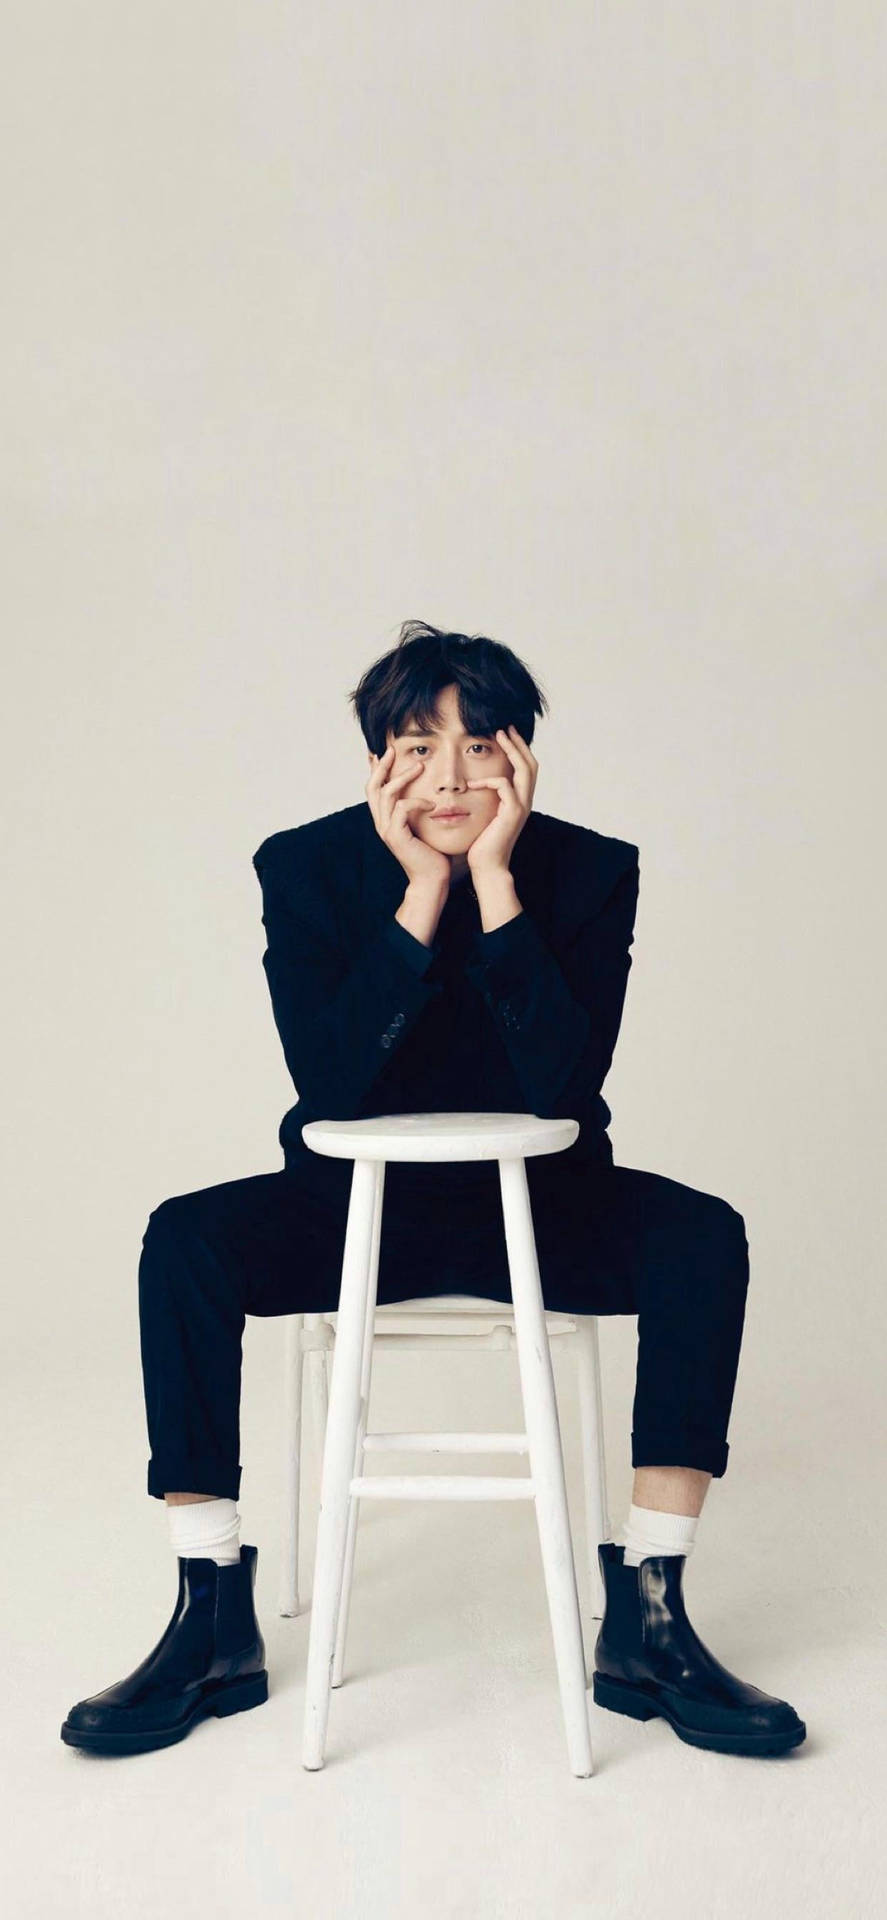 Kim Seon Ho Sitting Casually On A Chair. Background